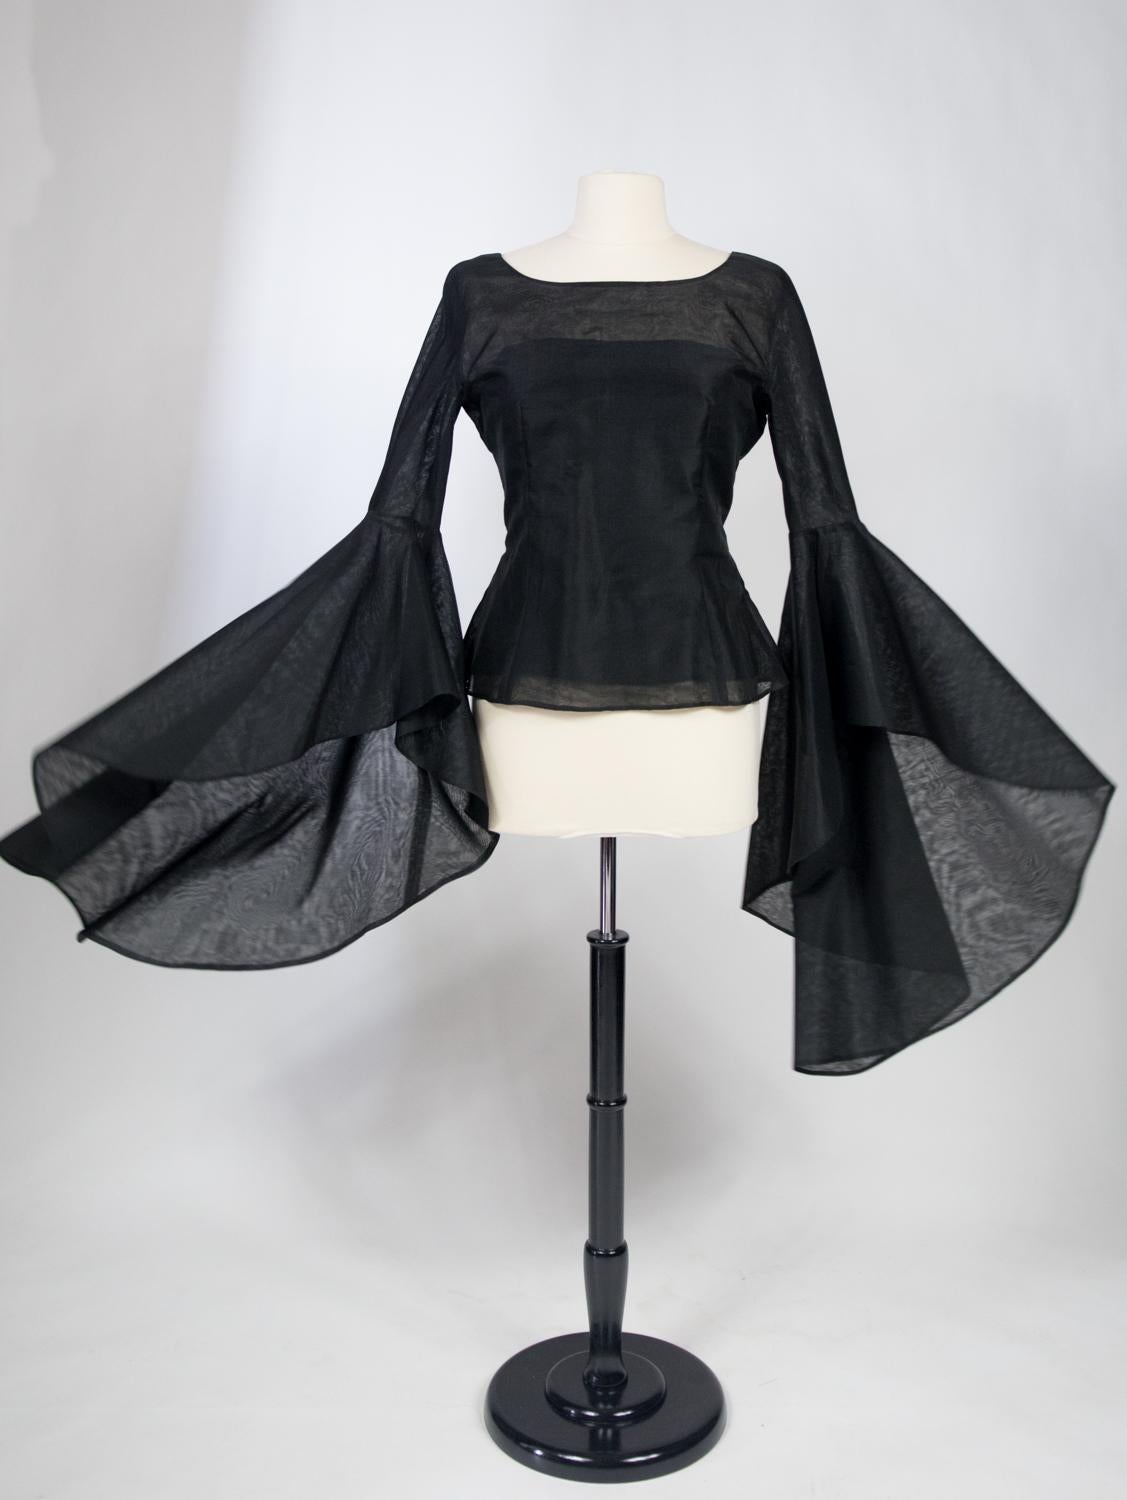 A Pierre Cardin Organza Blouse With Dramatic Batwing Sleeves Circa 1970/1980 For Sale 9